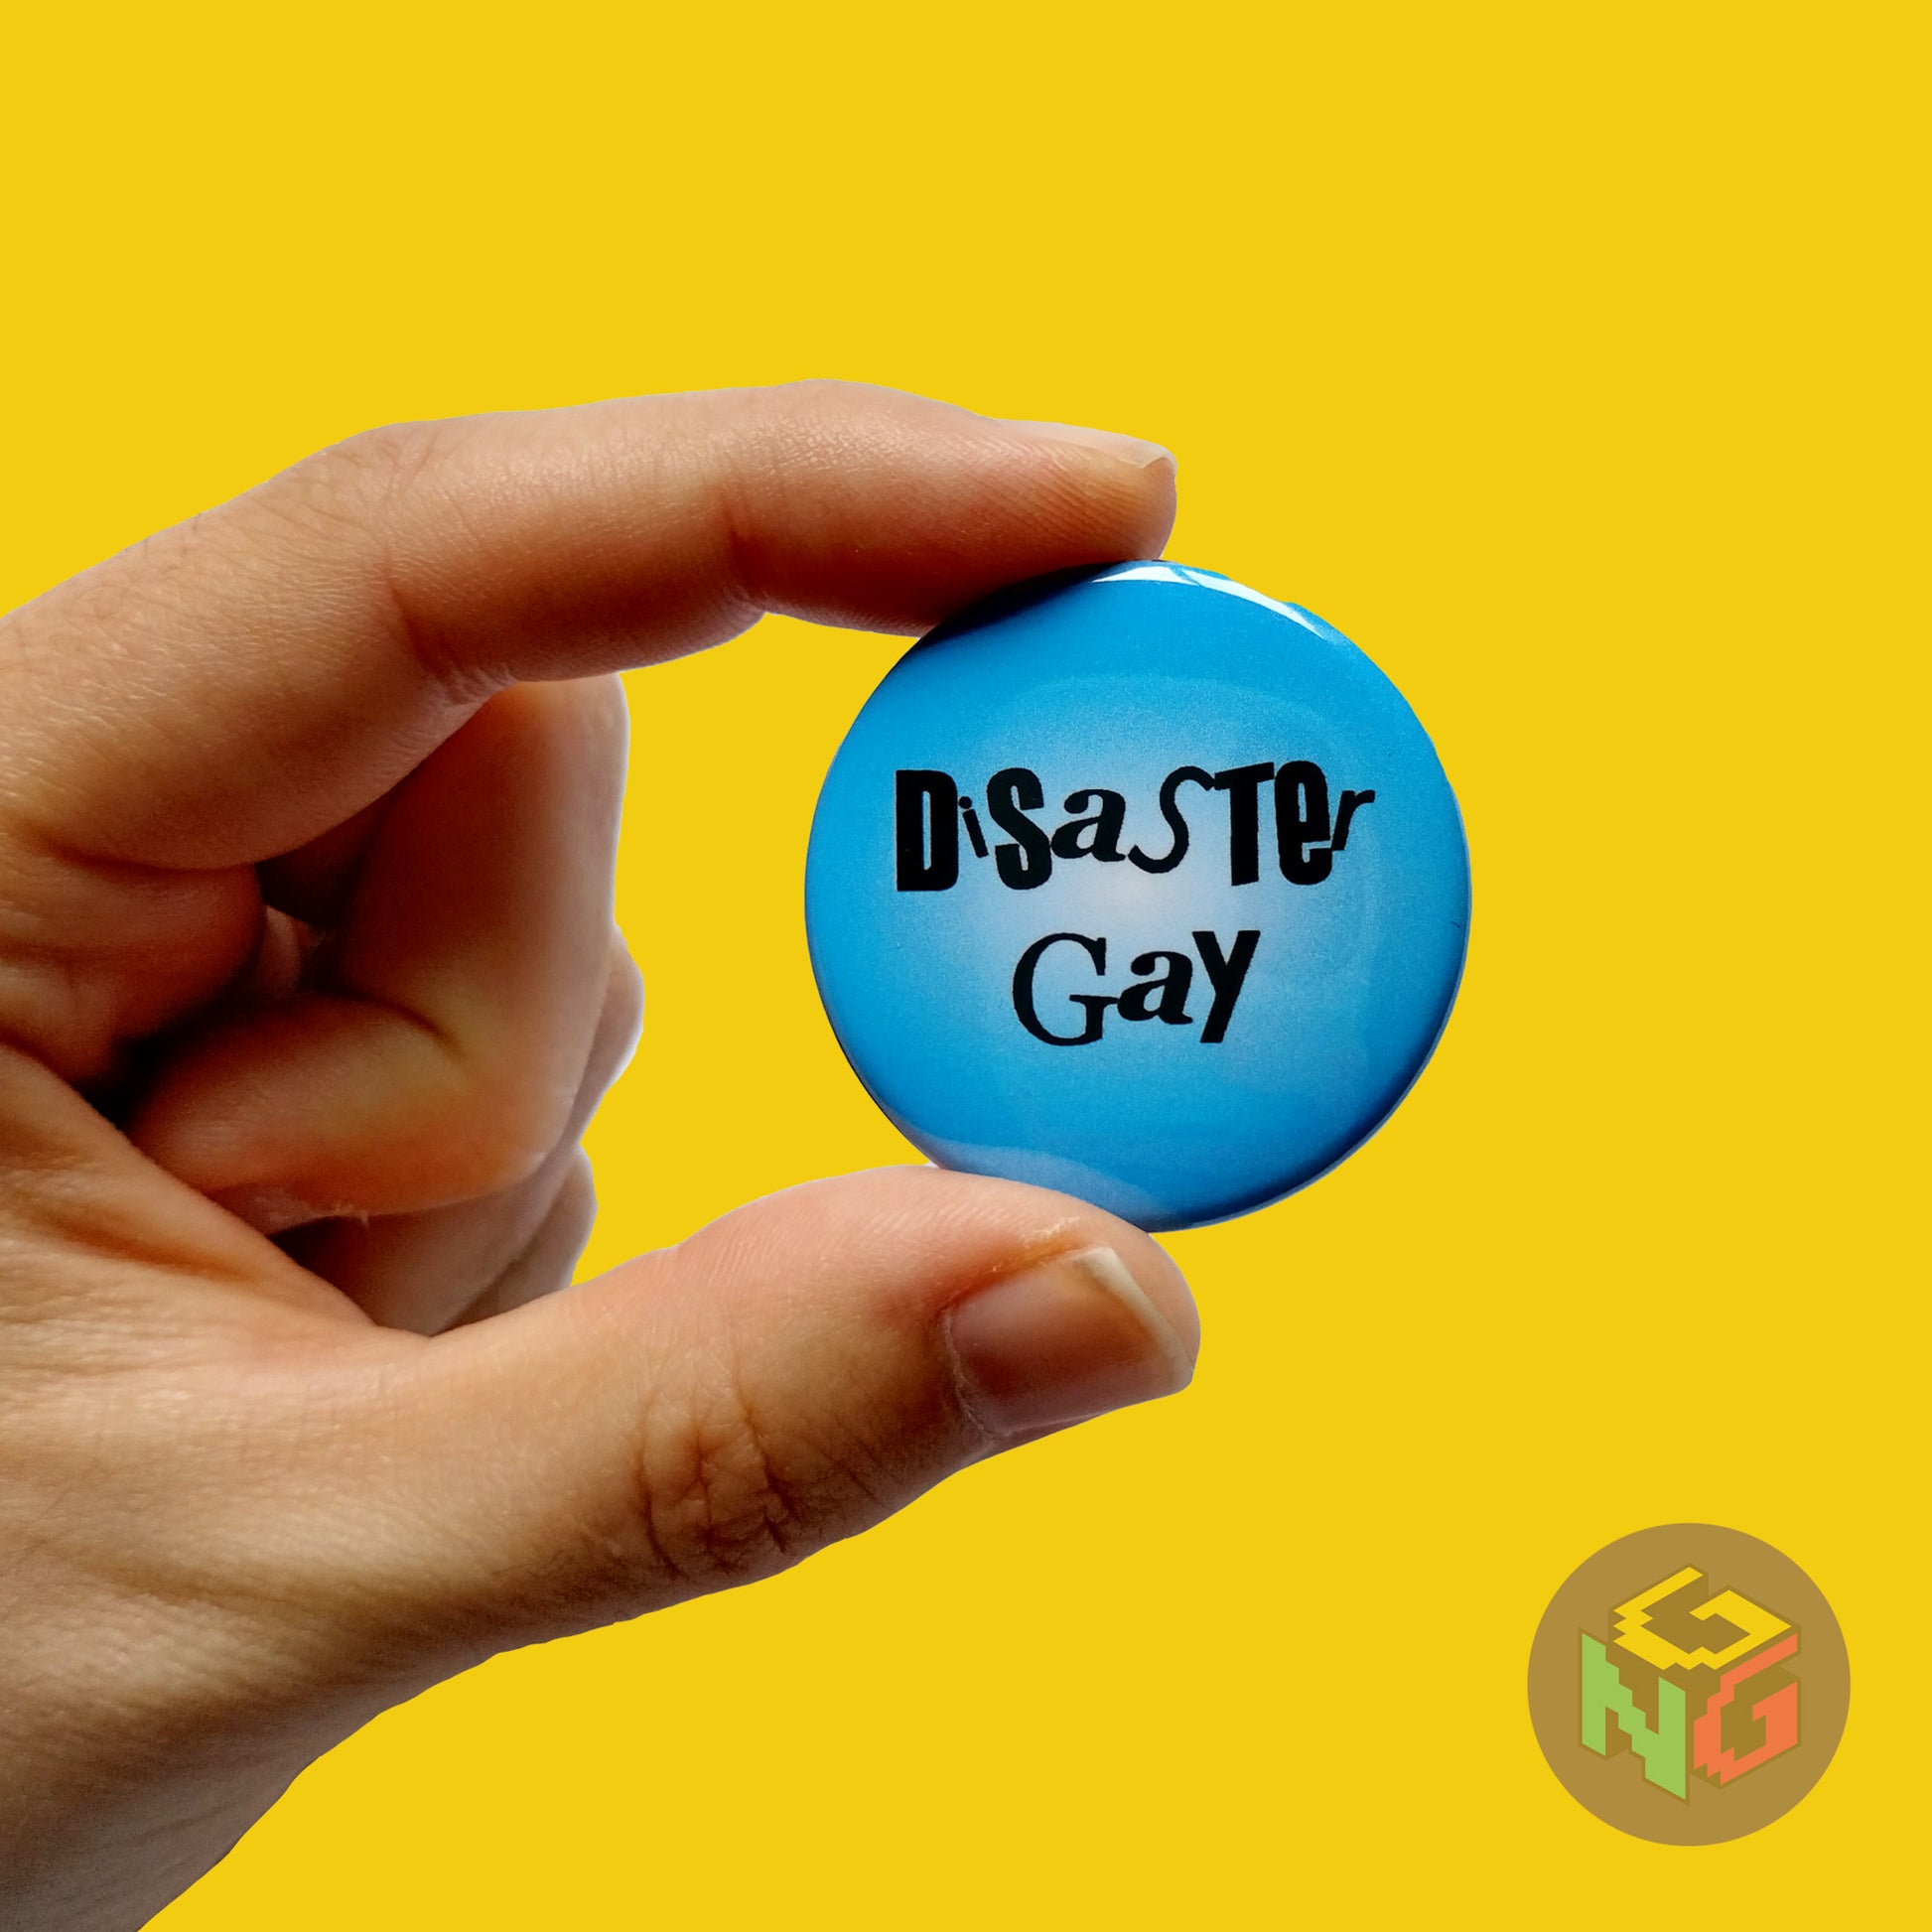 disaster gay button held in hand in front of yellow background